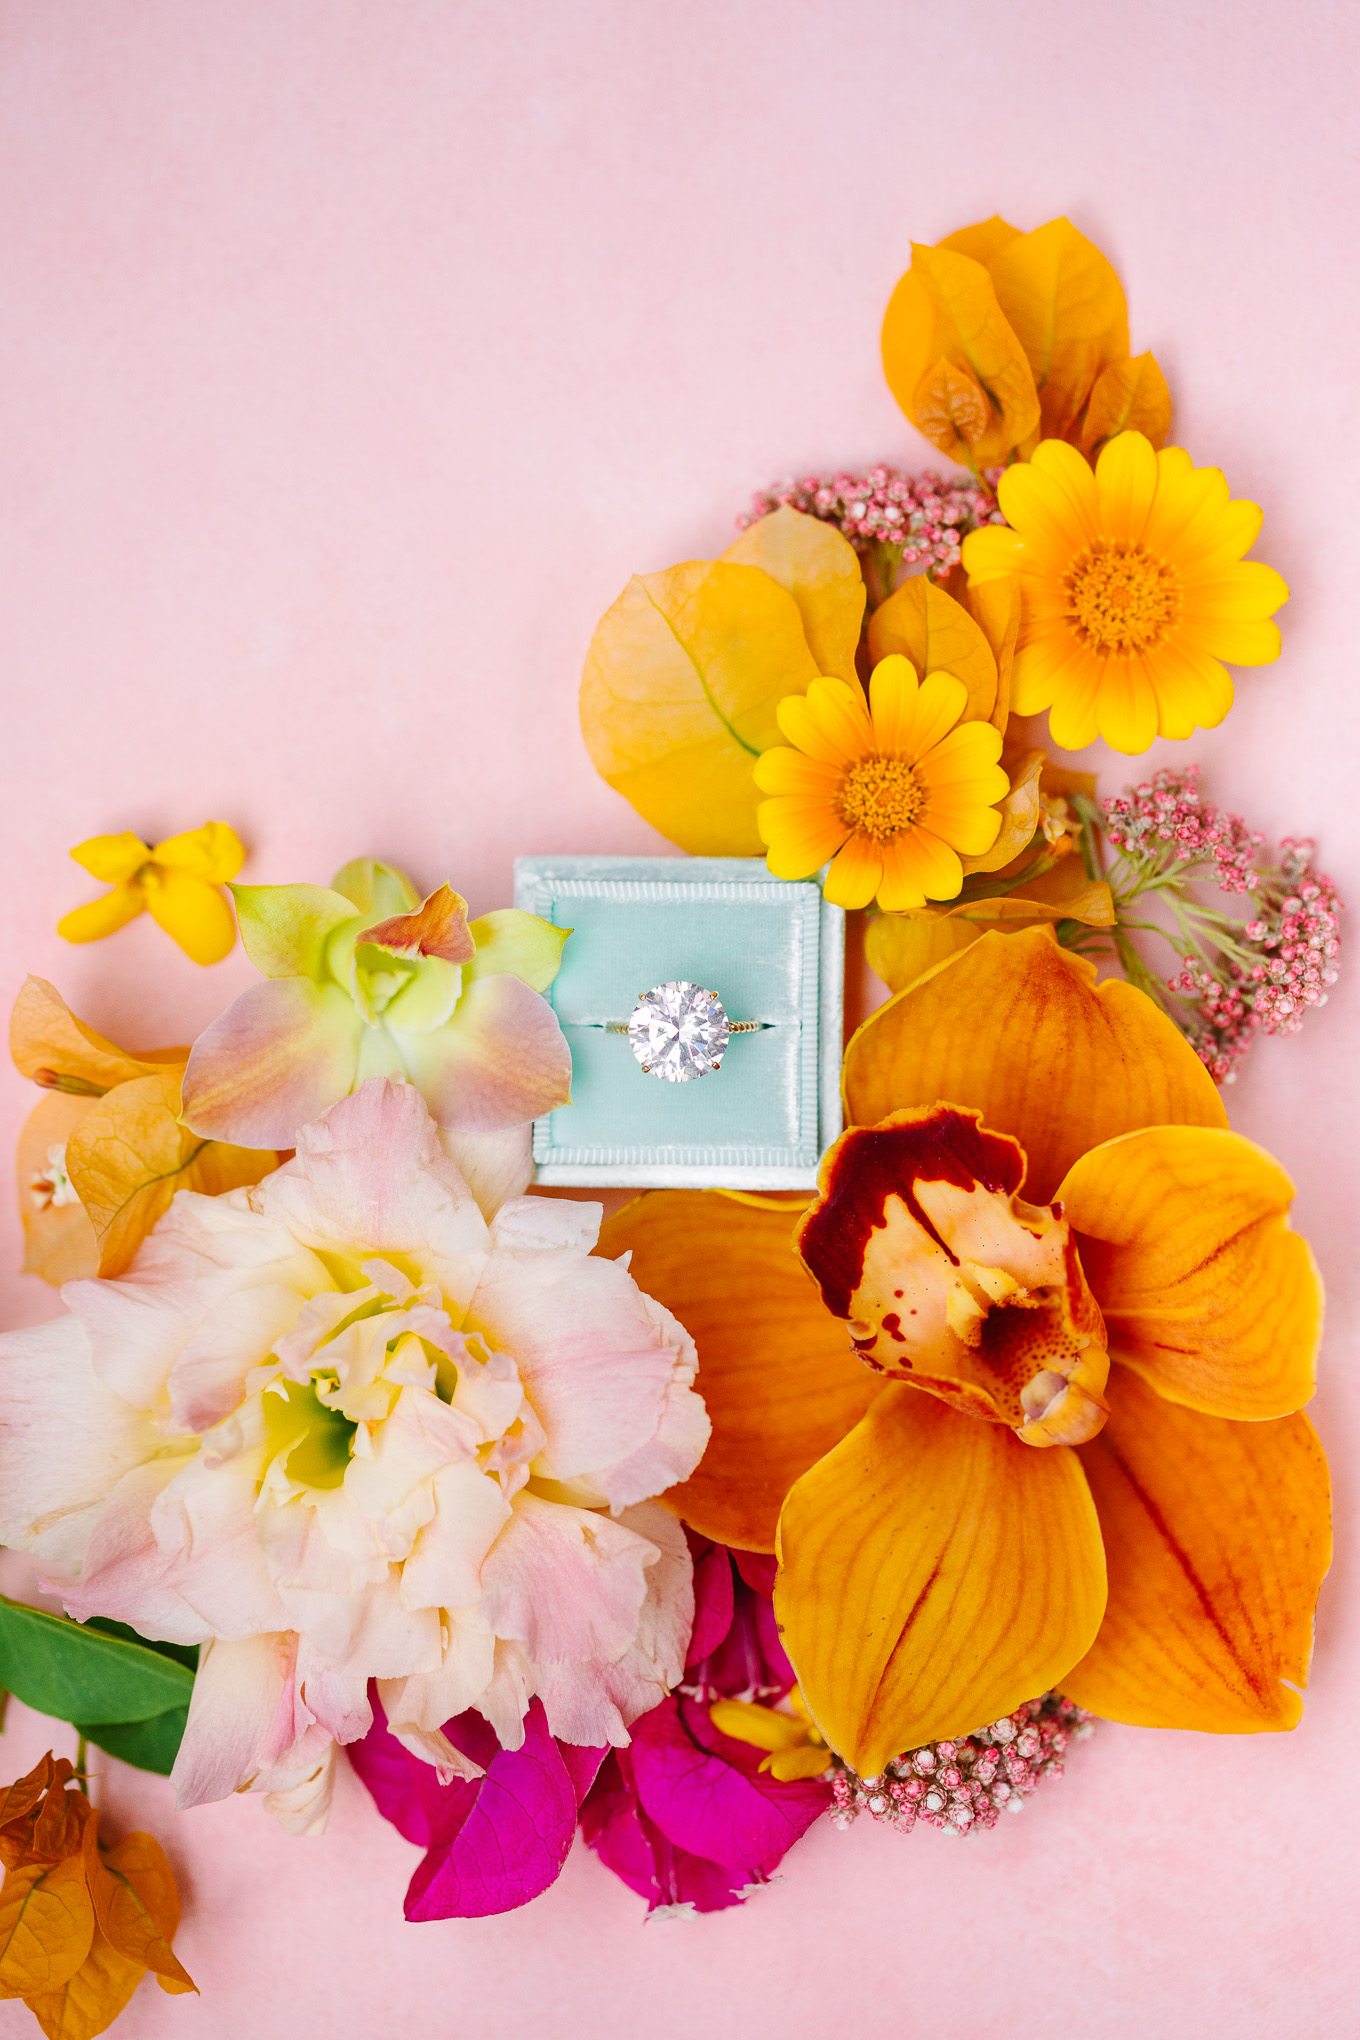 Pink floral flatlay with large diamond engagement ring | Kindred Presets x Mary Costa Photography Sands Hotel Ad Campaign | Colorful Palm Springs wedding photography | #palmspringsphotographer #lightroompresets #sandshotel #pinkhotel   Source: Mary Costa Photography | Los Angeles